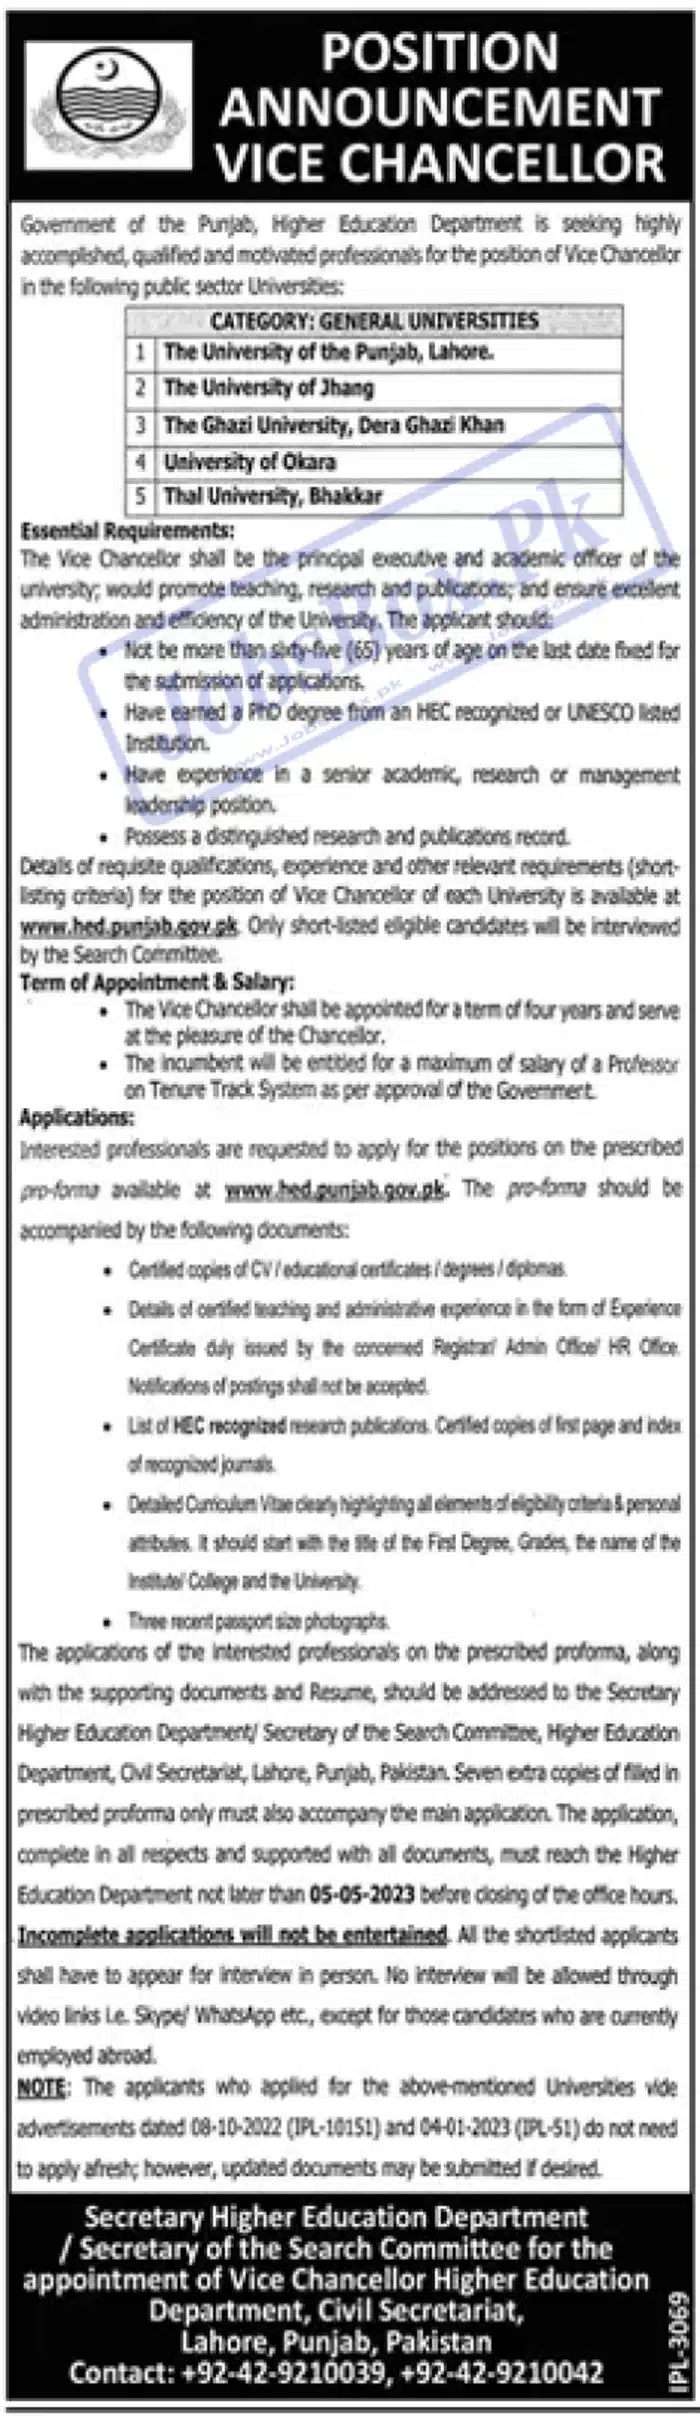 Vice Chancellors Jobs in Higher Education Department Punjab